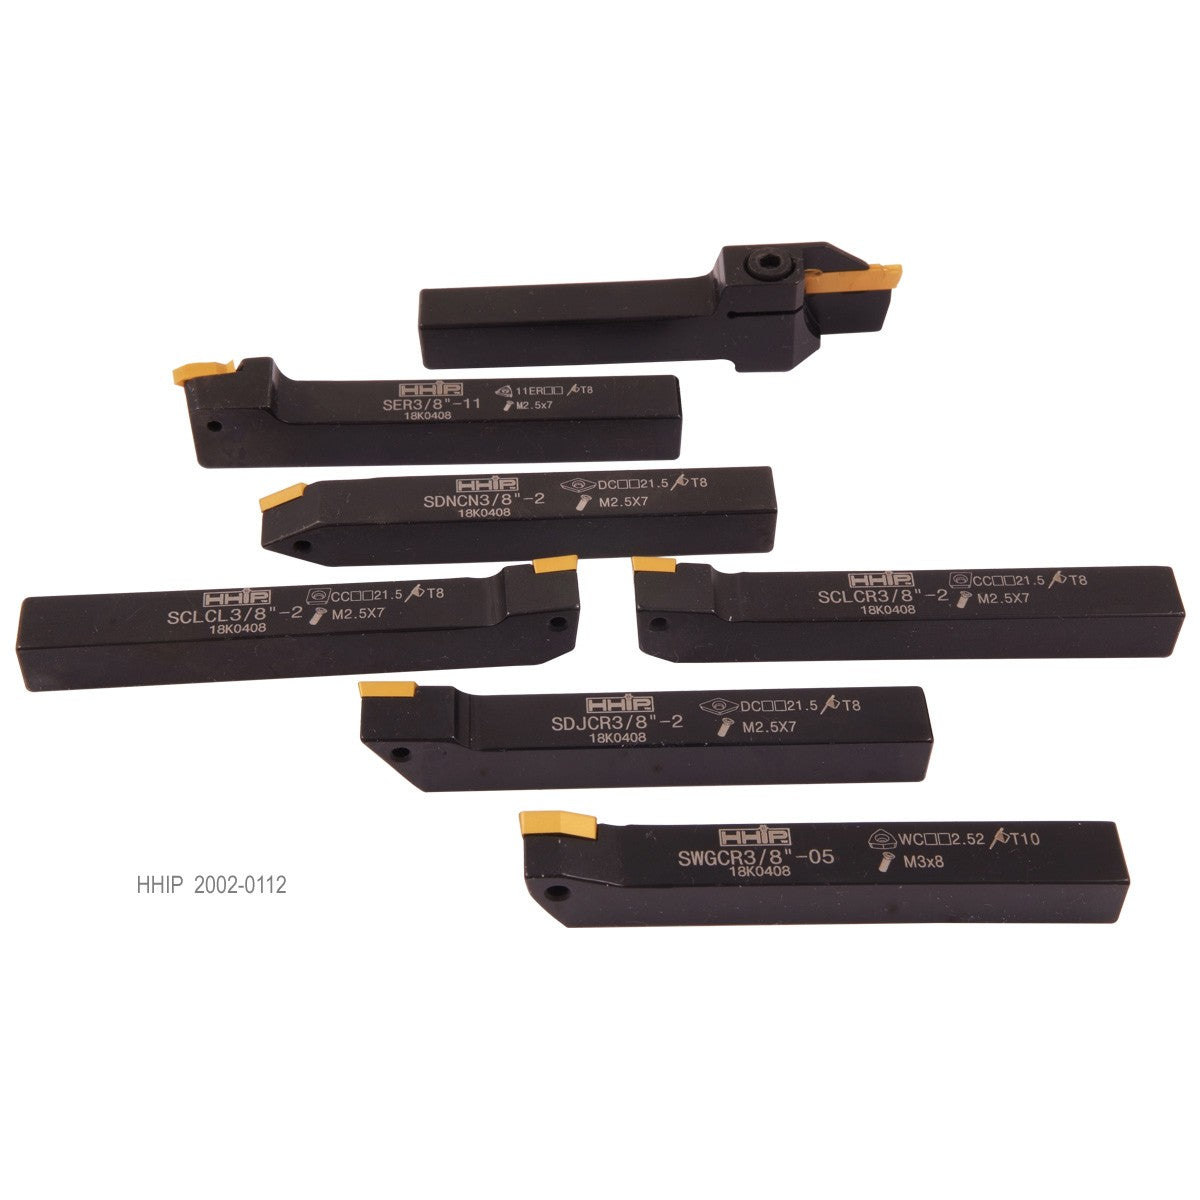 PRO-SERIES 7 PIECE 3/8 INDEXABLE CUT OFF & TURNING TOOL SET